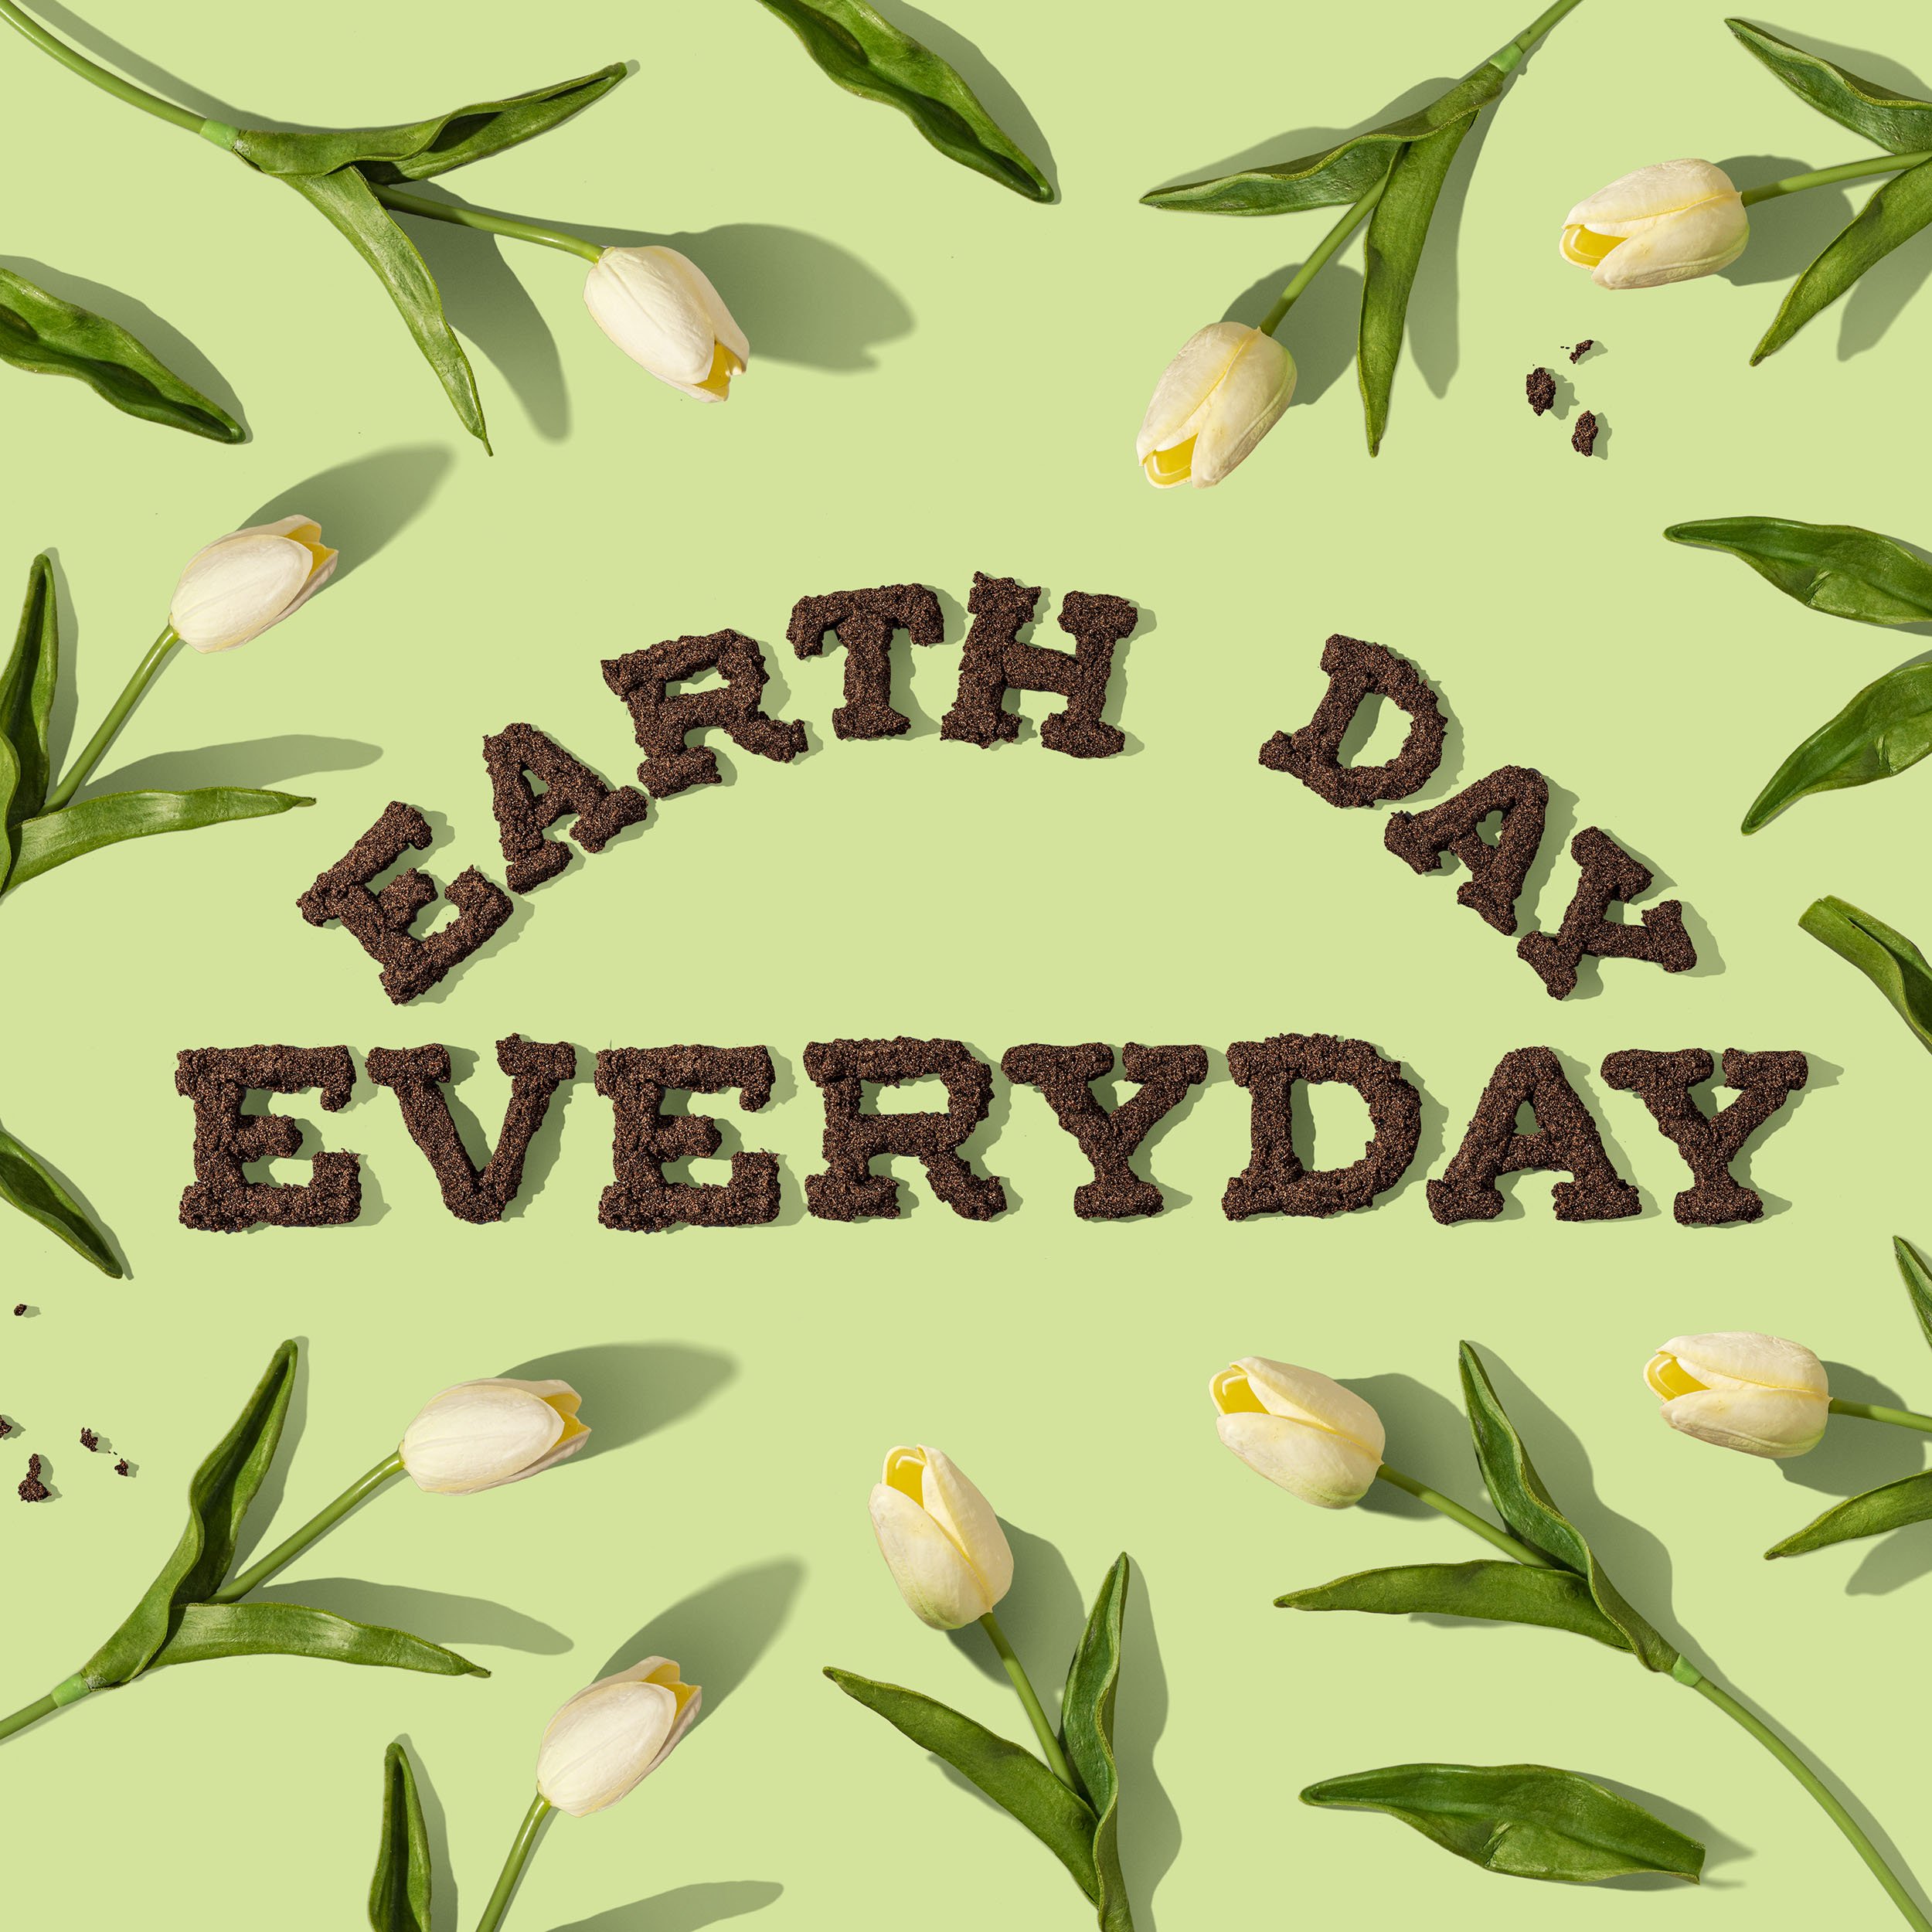 It’s Earth Day on April 22!